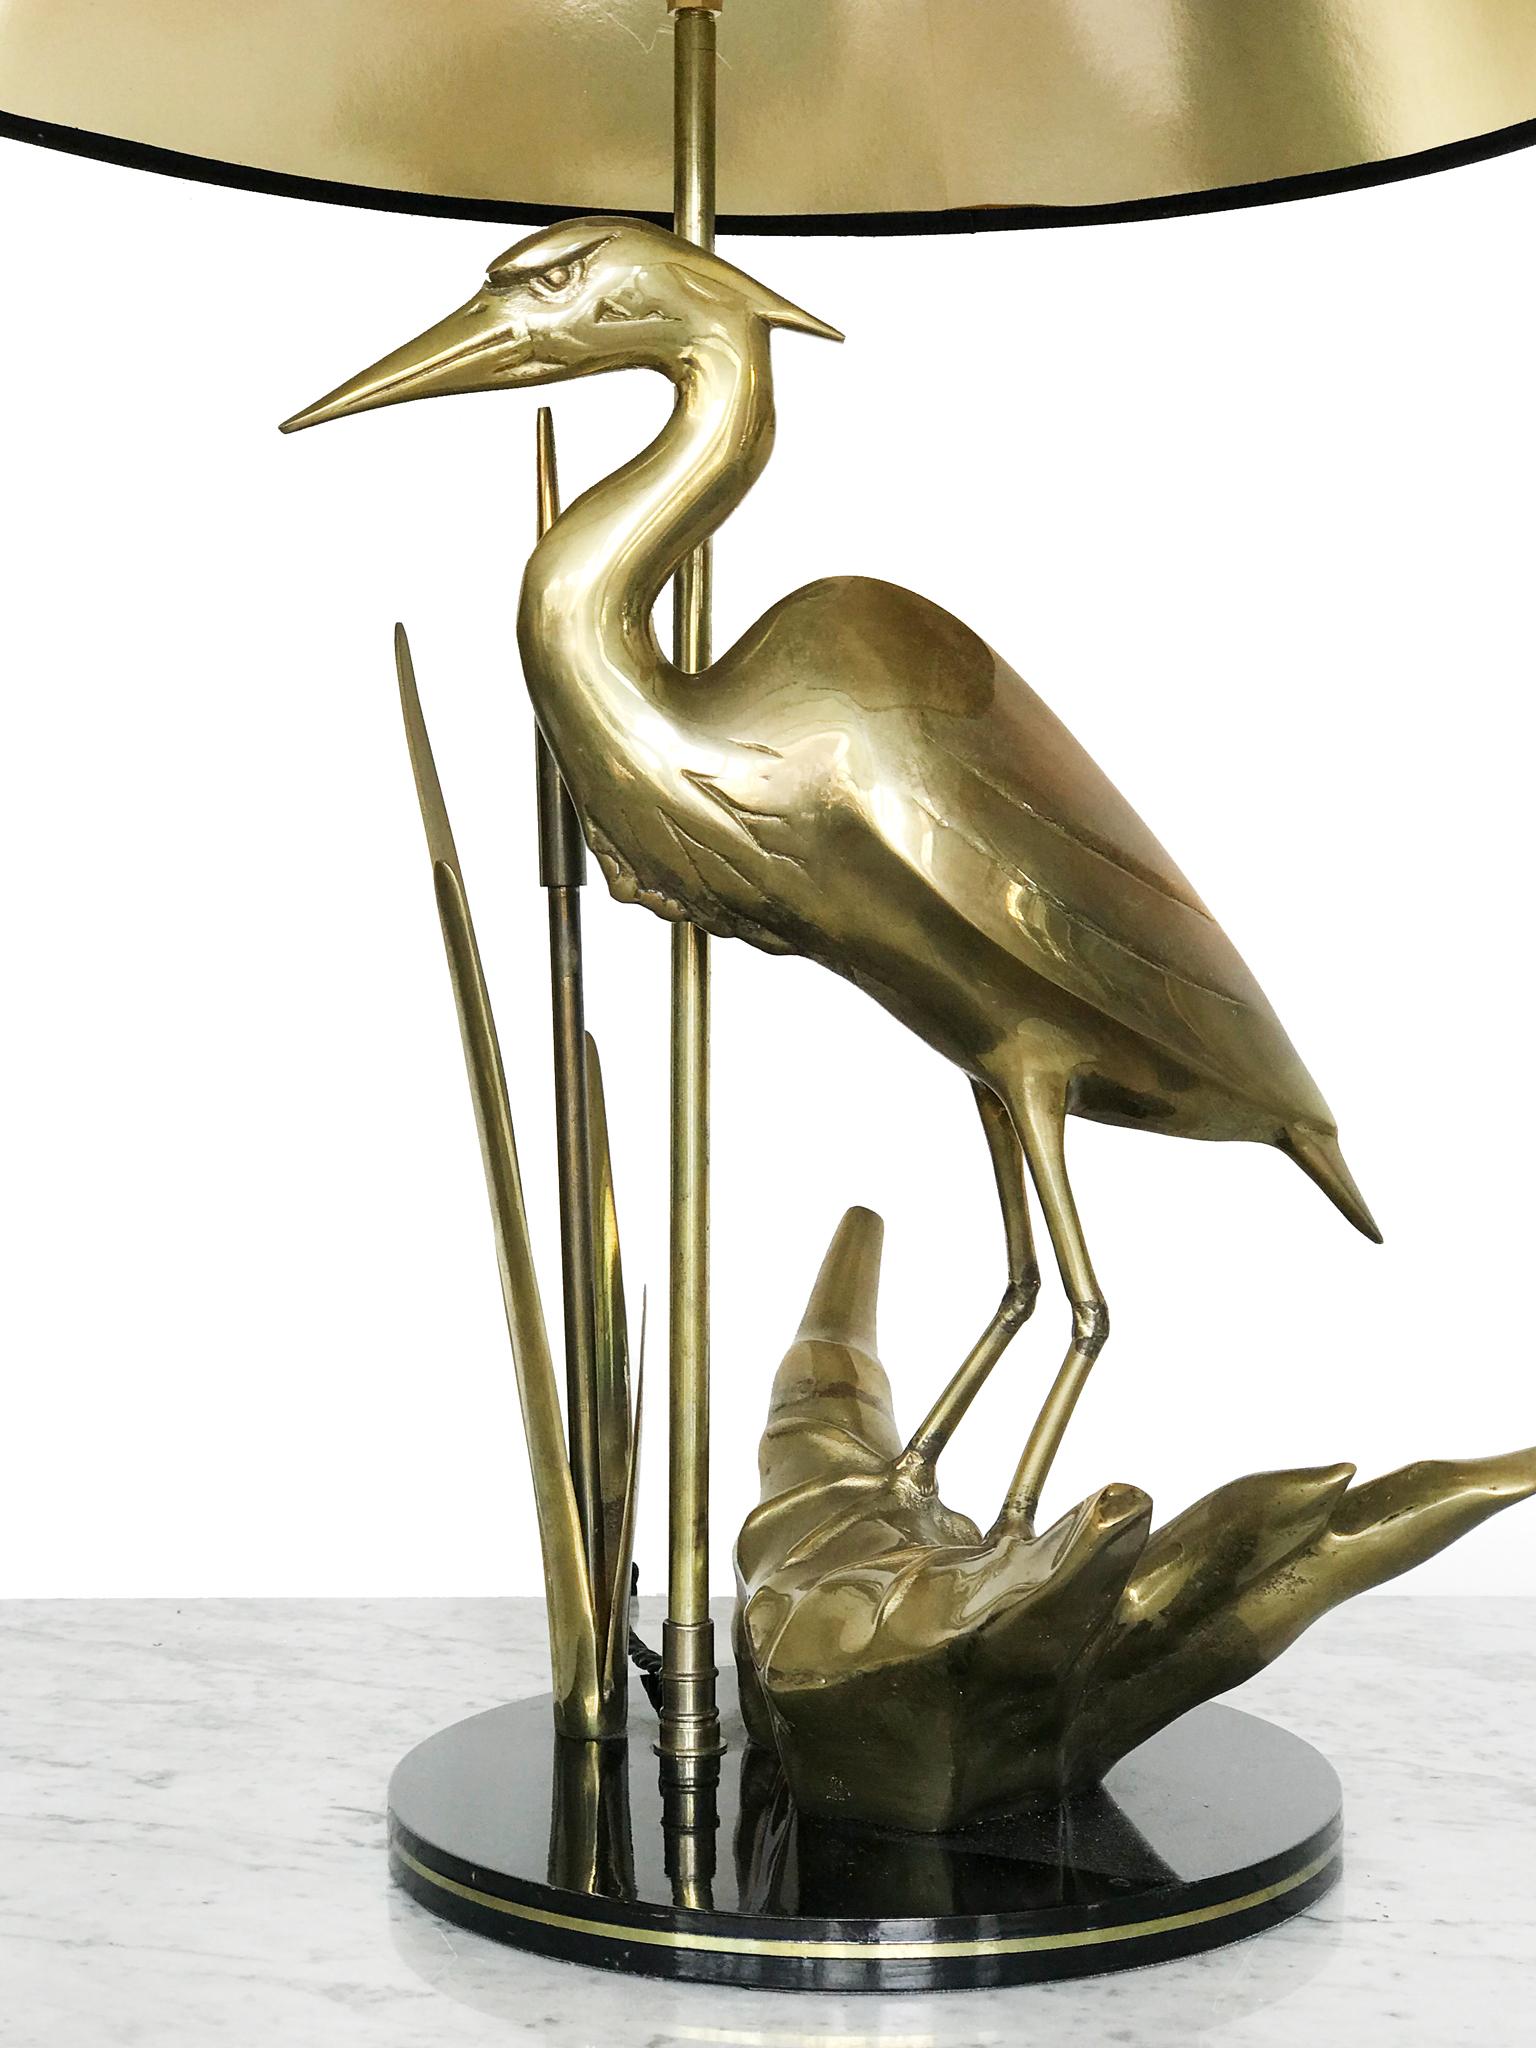 A sculptural lamp in brass formed as a heron in a naturalistic setting with reed detail. Set on a circular black gloss base. Original black shade with gold lining. 
This stylish French lamp has a luxurious appeal.
Height including: 74cm
Height